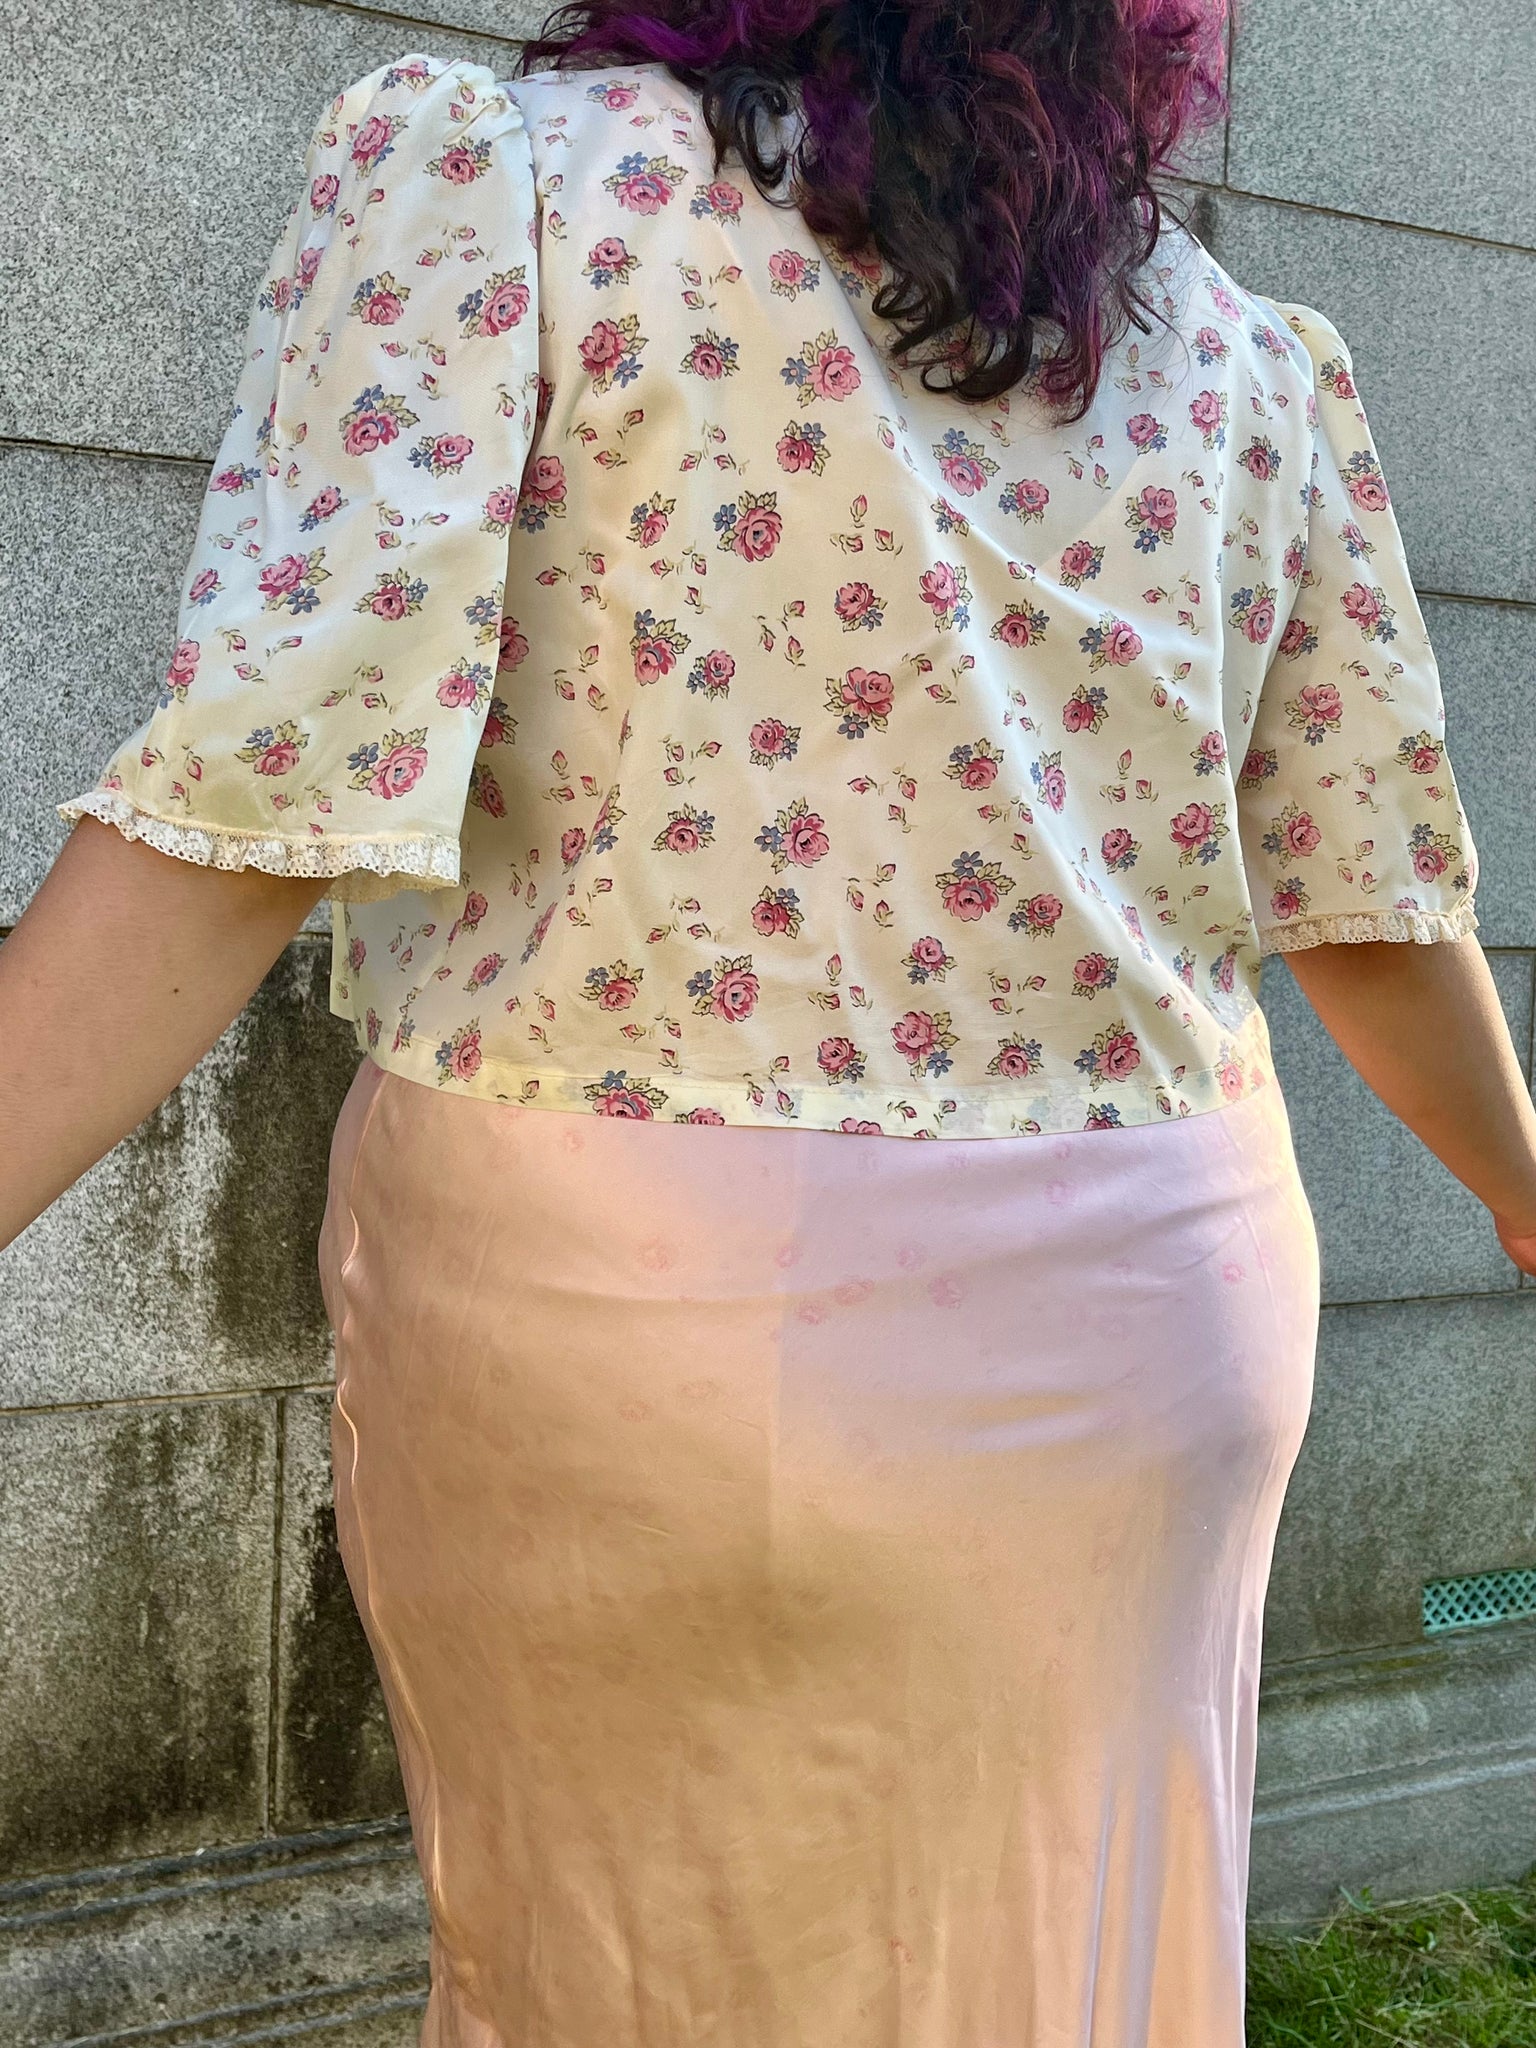 1940s Cream Pink Floral Printed Rayon Bed Jacket Lace Tie Close Puff Sleeve